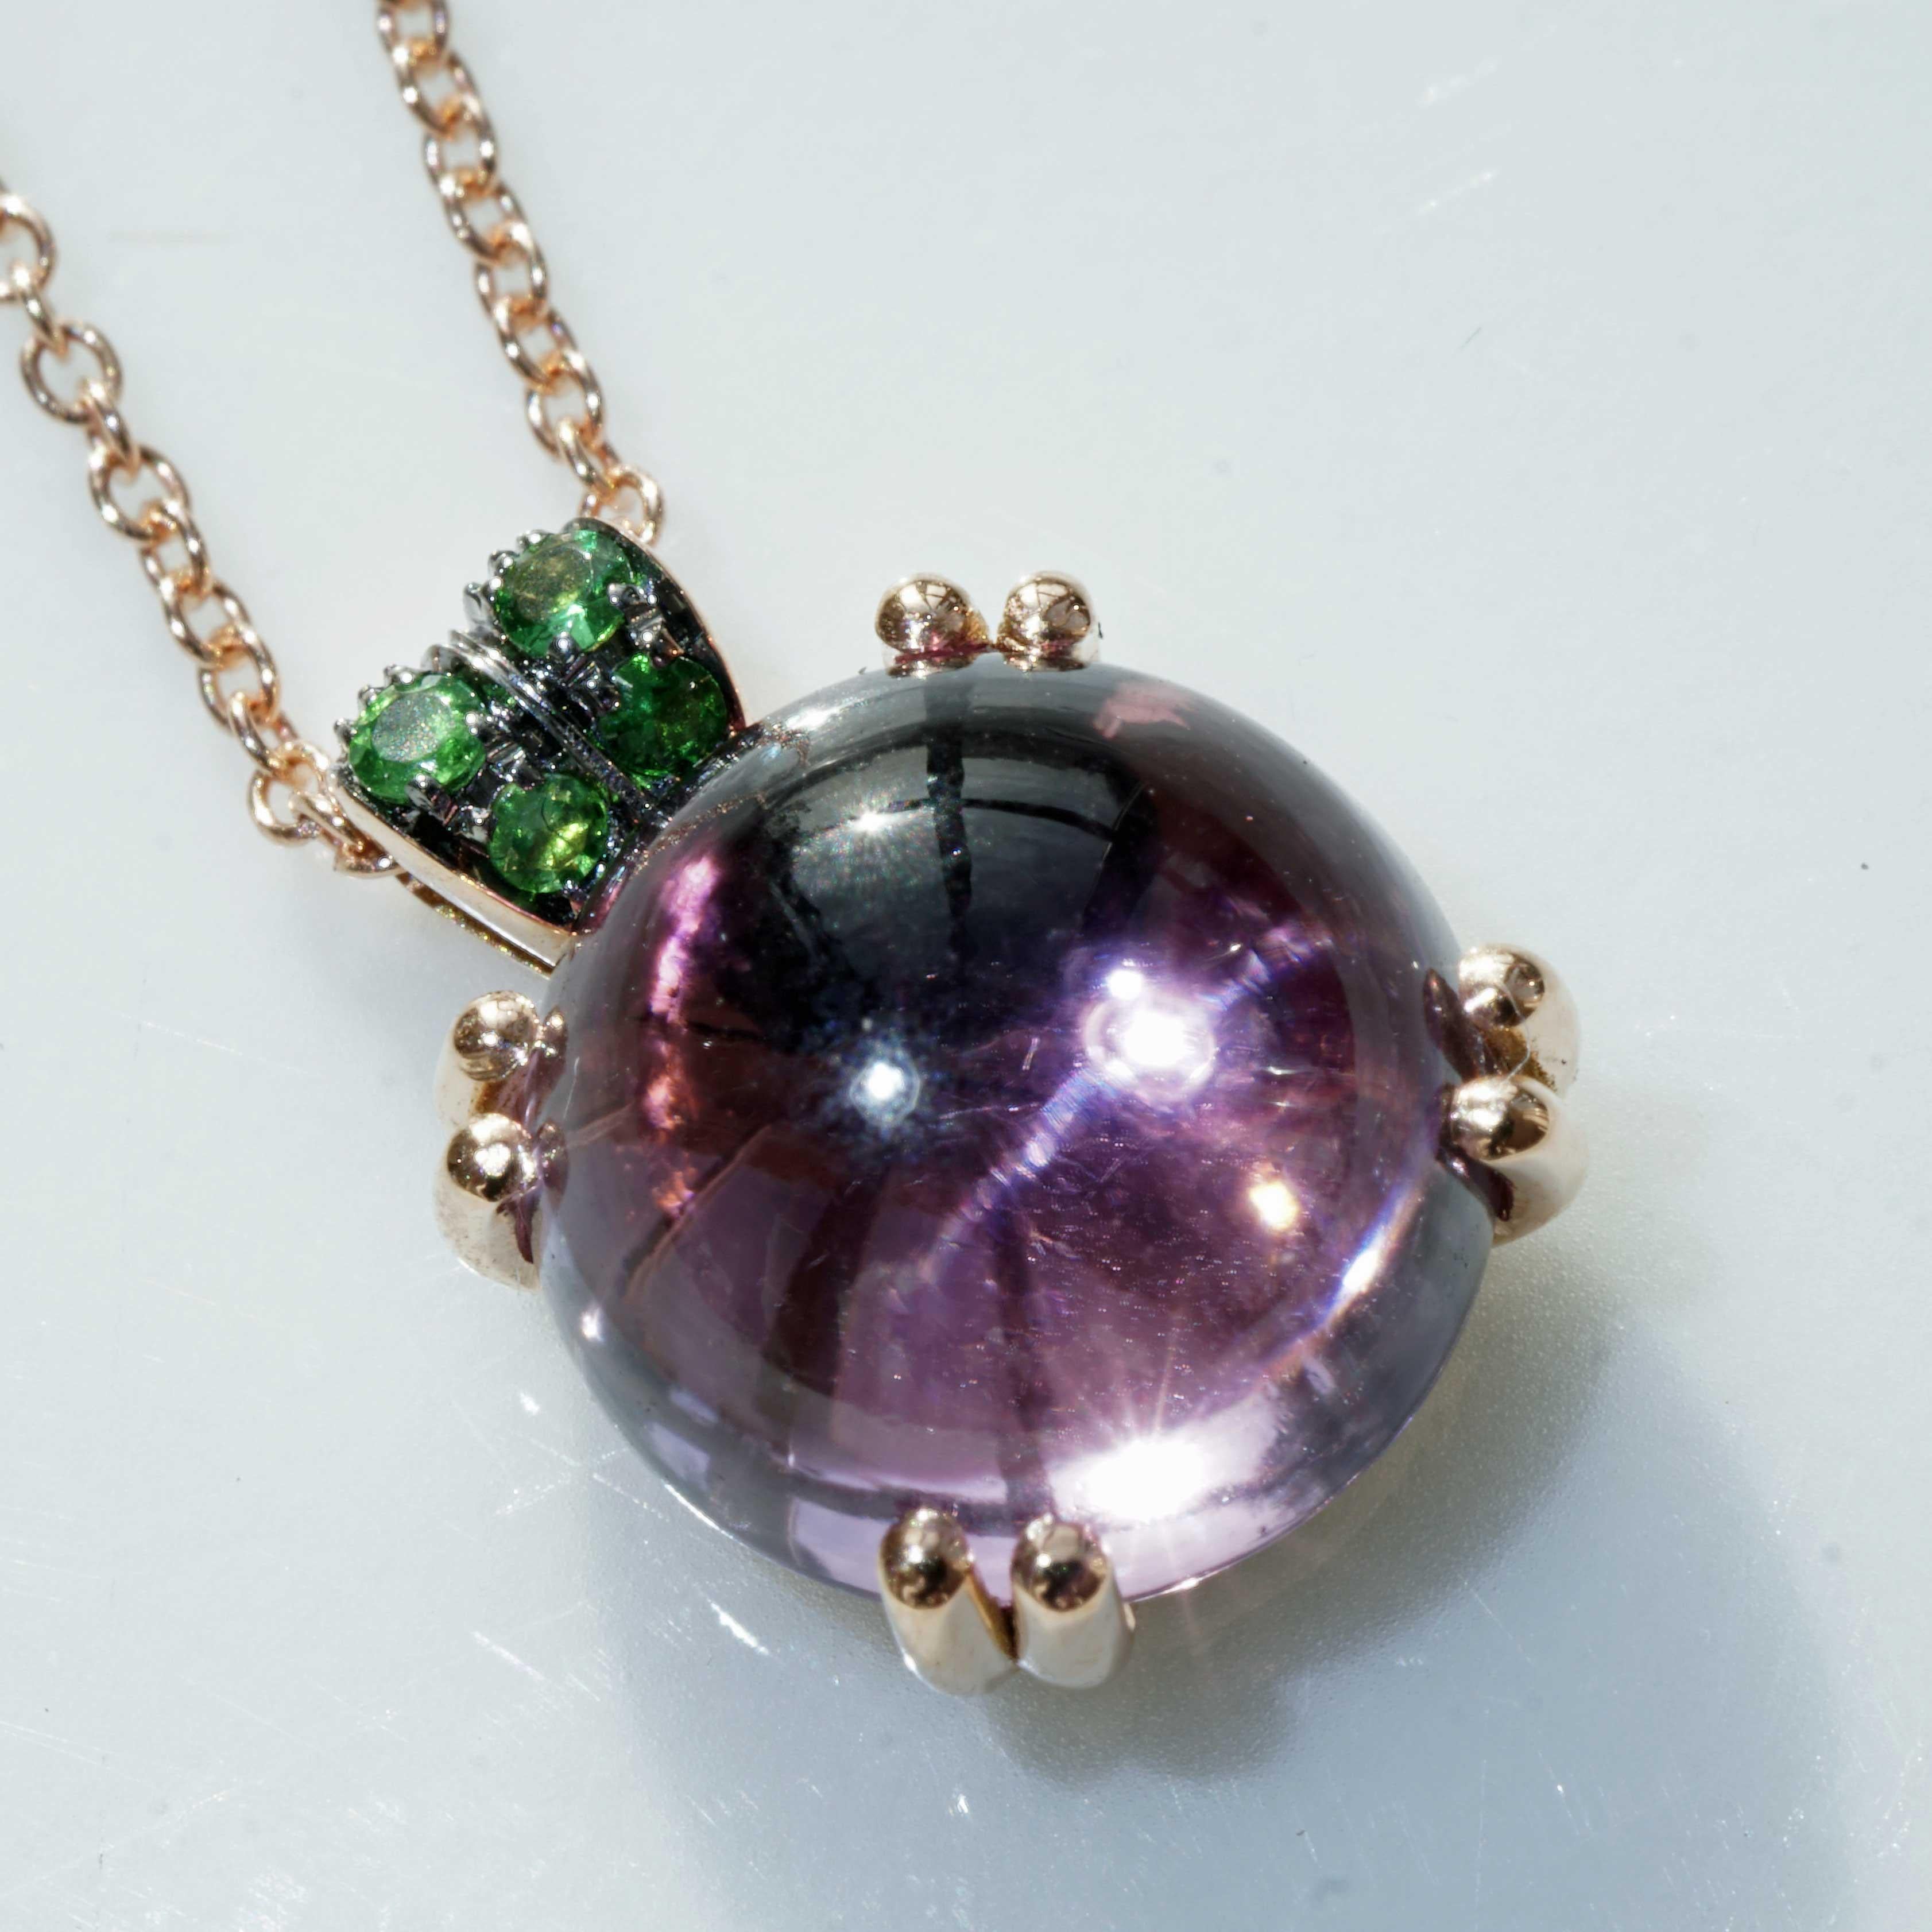 Sweet bubble necklace with 10 mm large amethyst in fine color quality, approx. 3.45 ct, solid modern crab setting with long double crabs, pendant eye set with four green tsavorites totaling approx. 0.04 ct, fine anchor chain with 0.8 mm diameter,